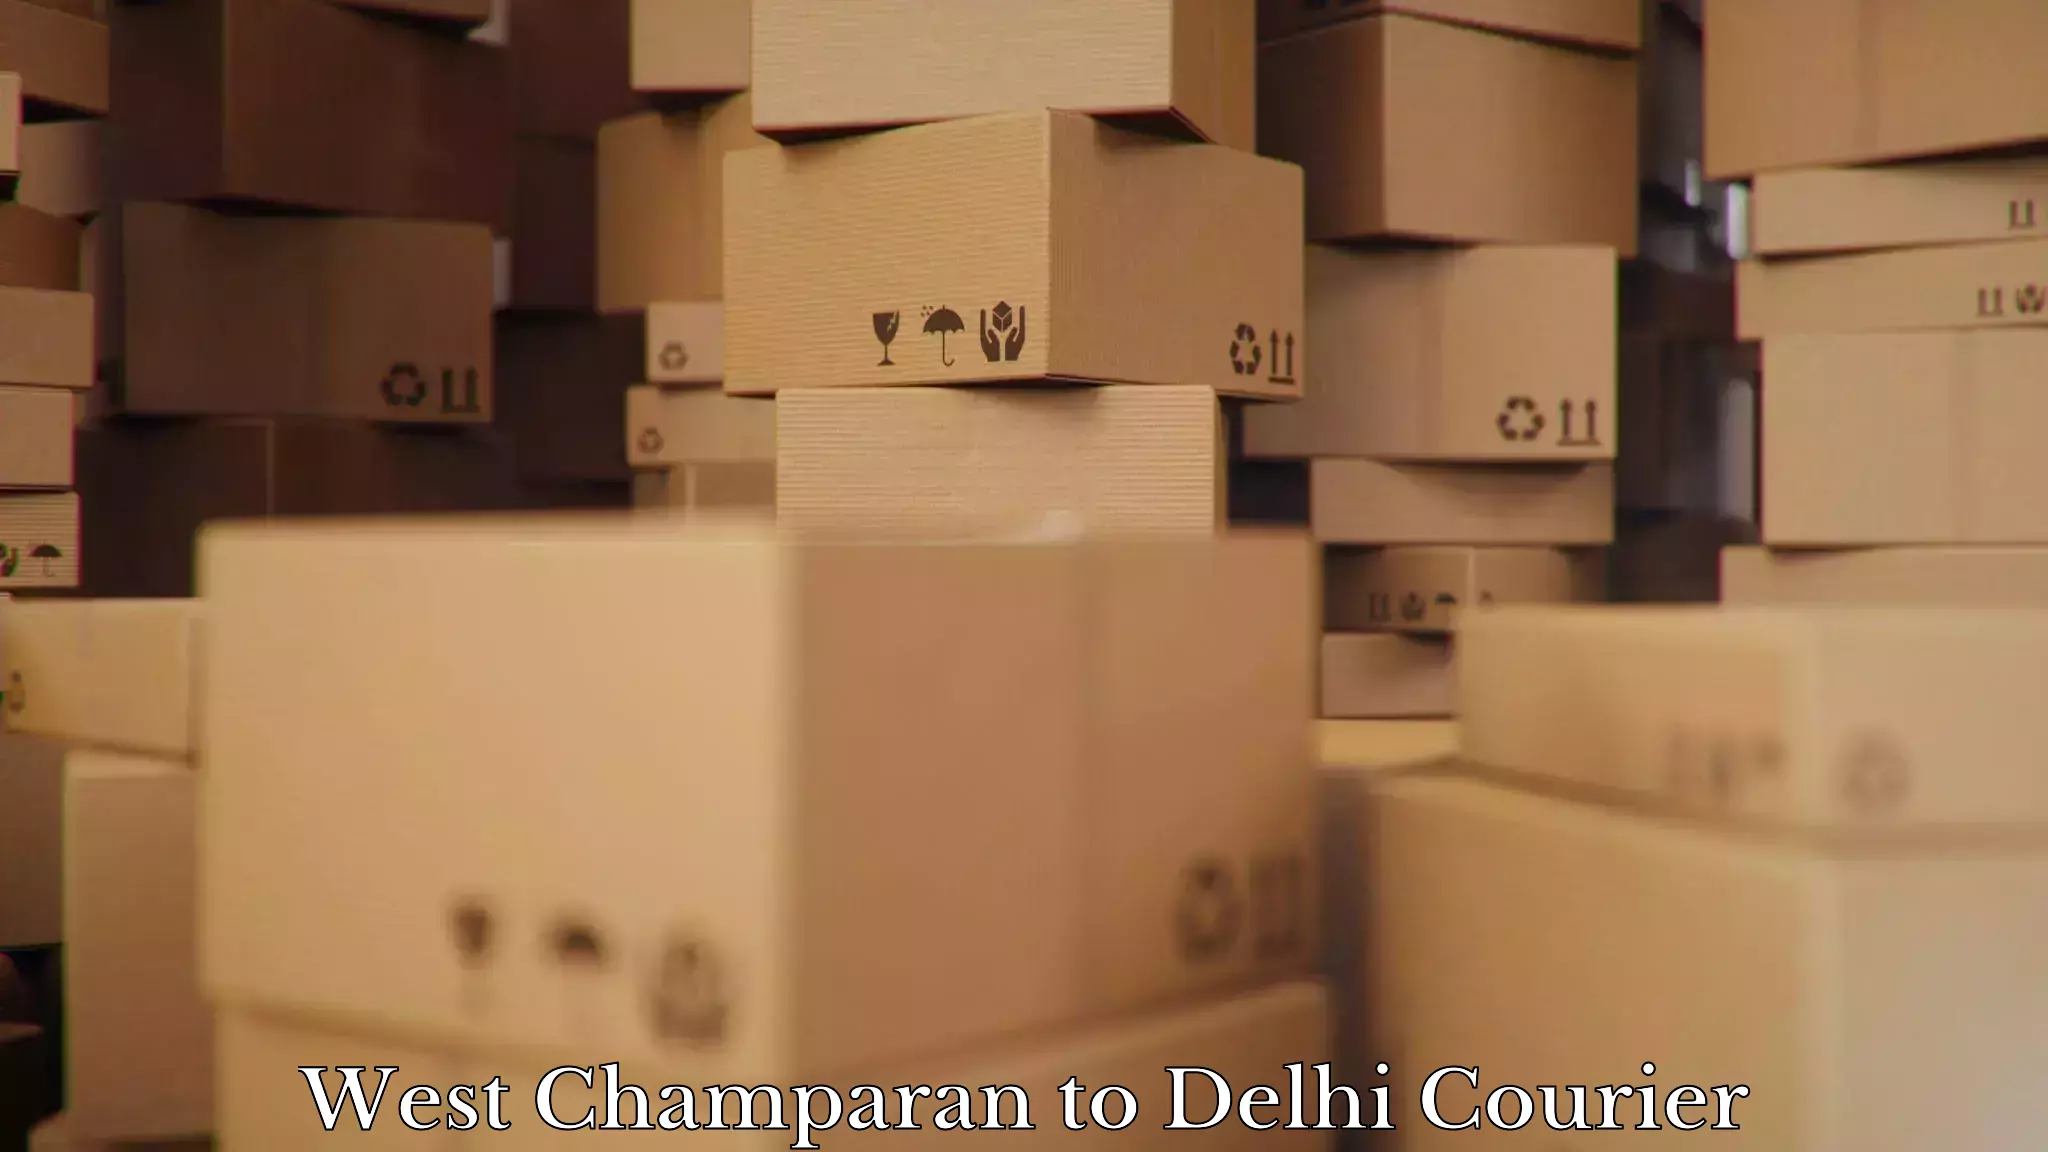 Furniture transport experts West Champaran to NCR